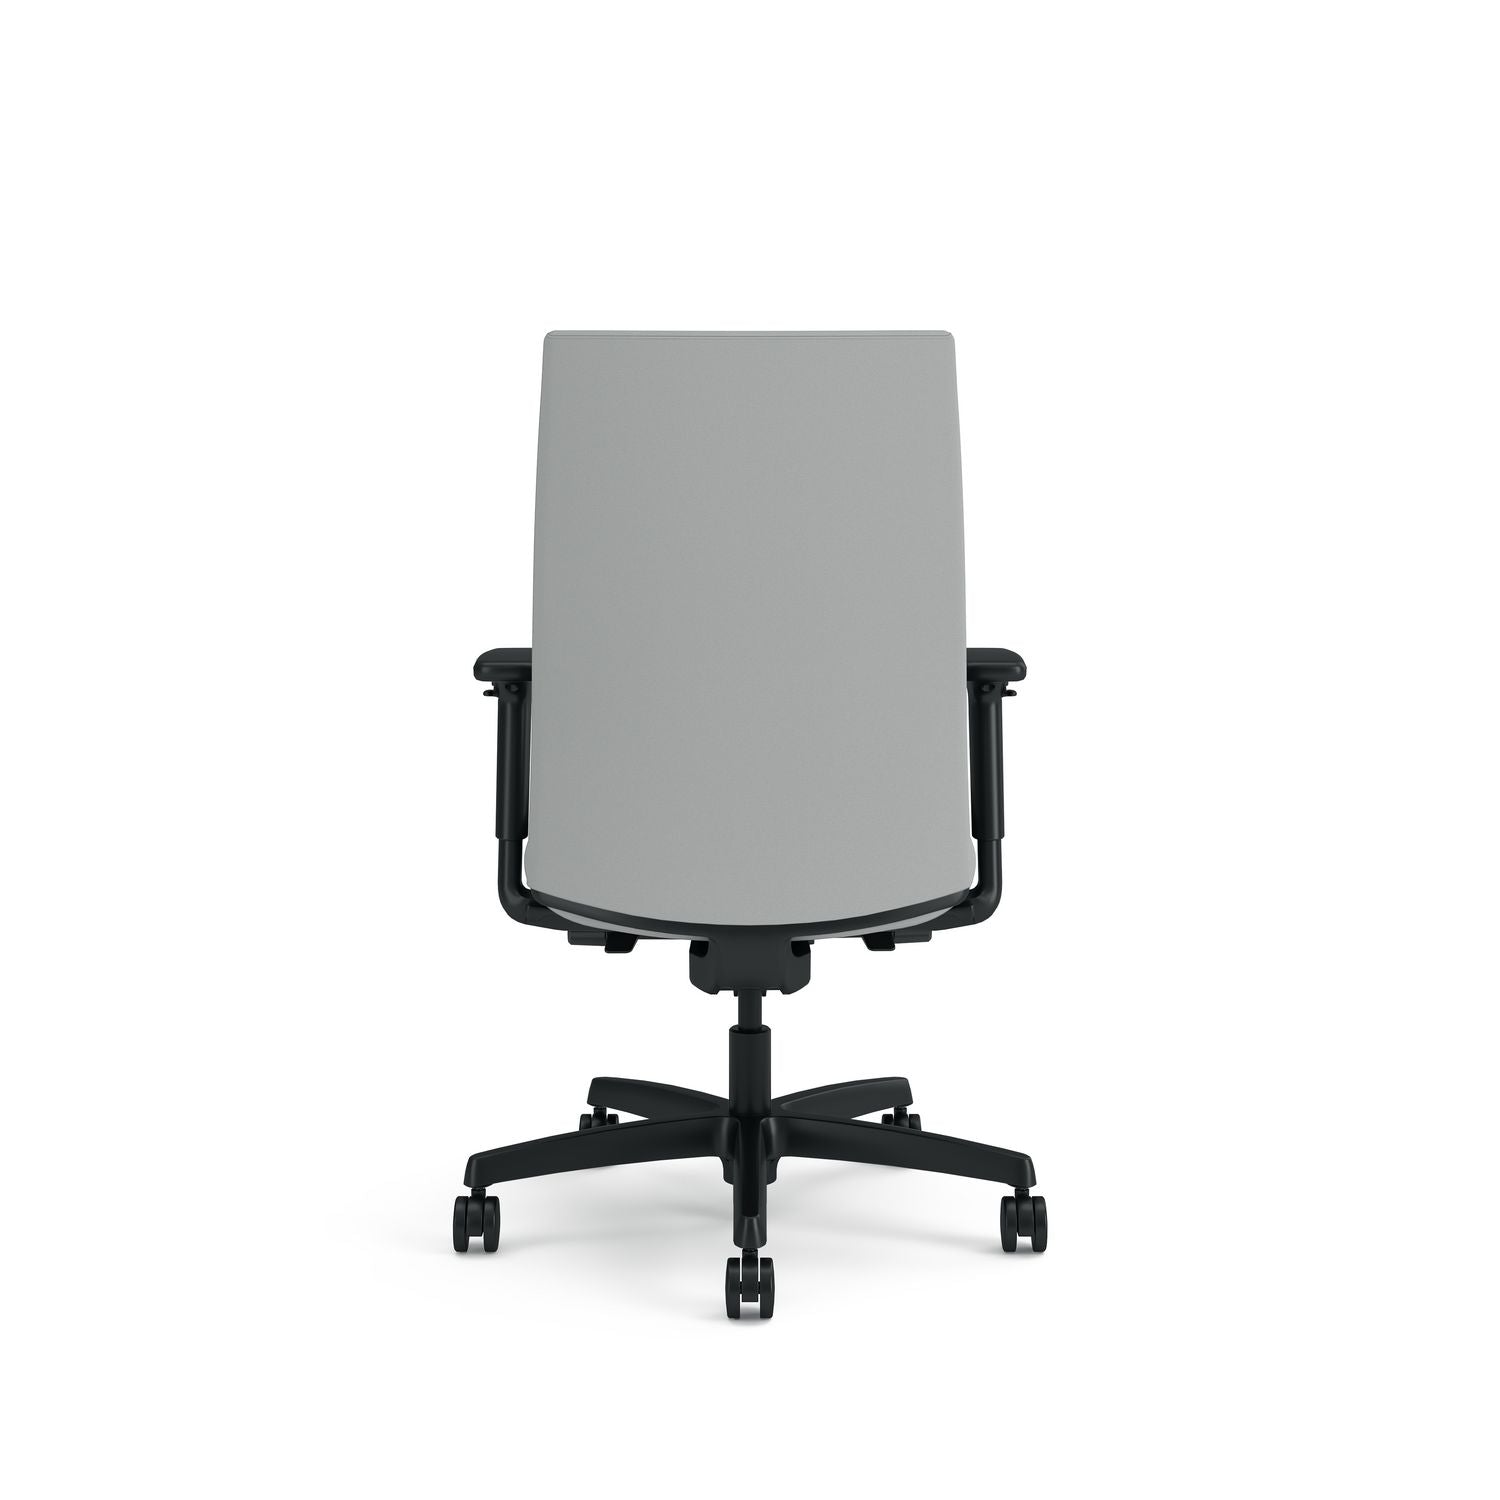 ignition-20-upholstered-mid-back-task-chair-up-to-300-lbs-17-to-215-seat-height-flint-seat-and-back-black-base_honi2u2asx39ntk - 2